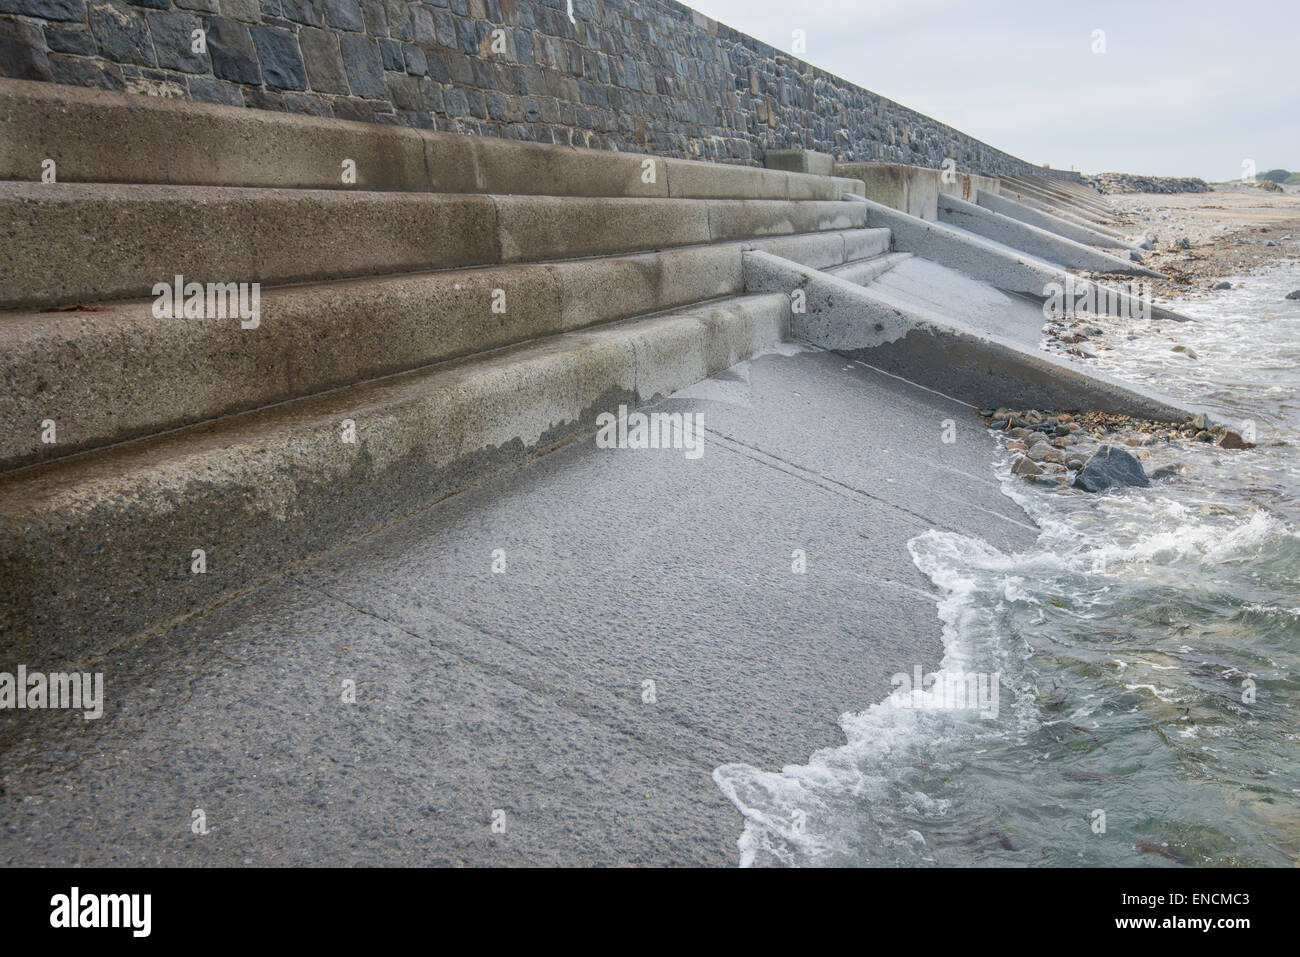 Concrete & granite sea wall on the west coast of Guernsey, Channel Islands. Stock Photo